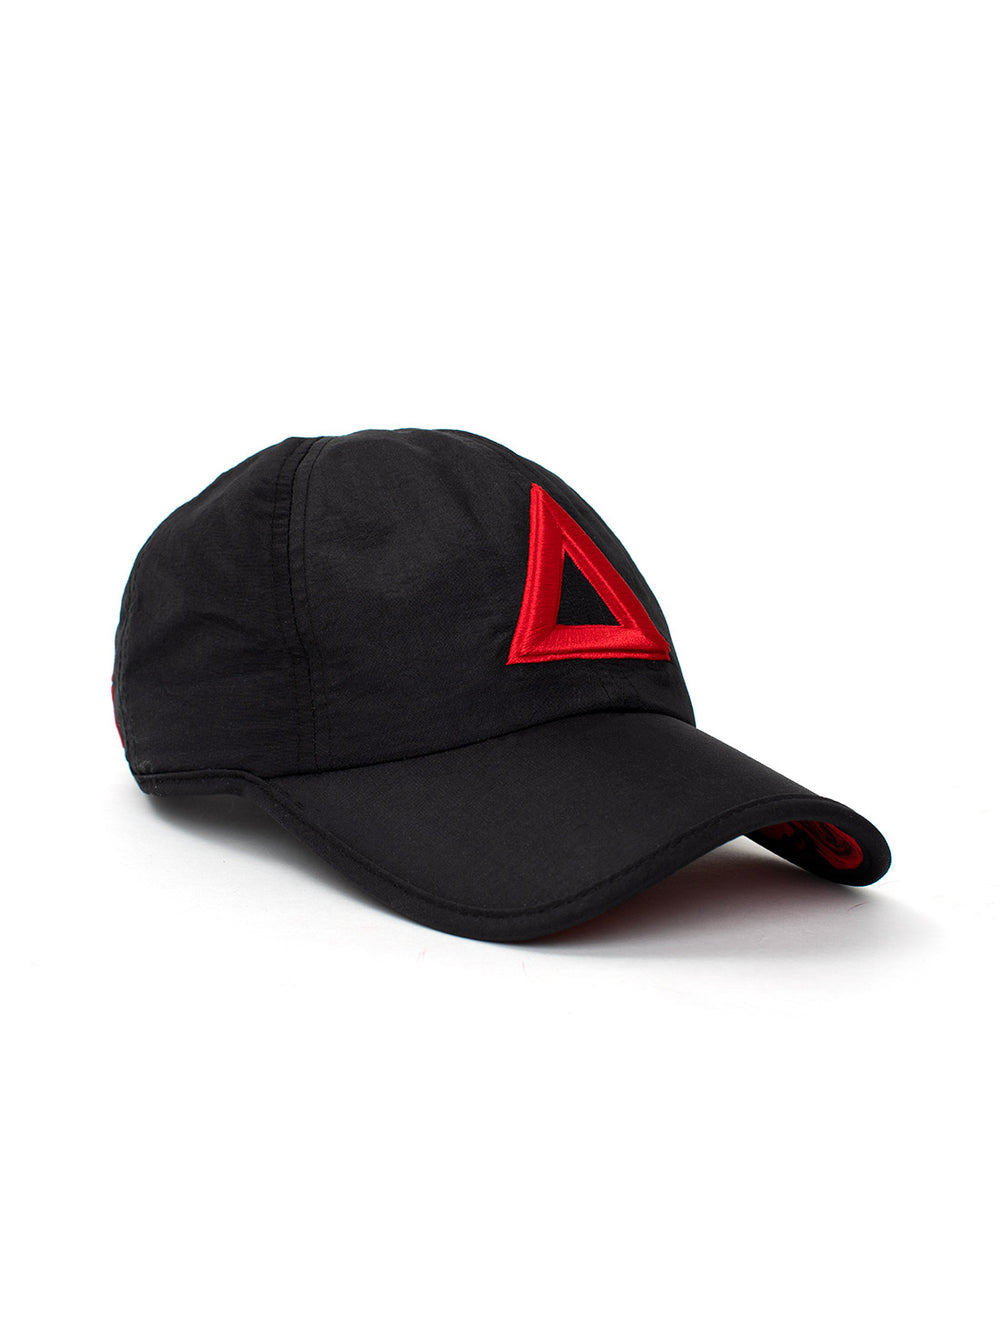 DRY FIT Rose DAD hat - Triangulo Swag